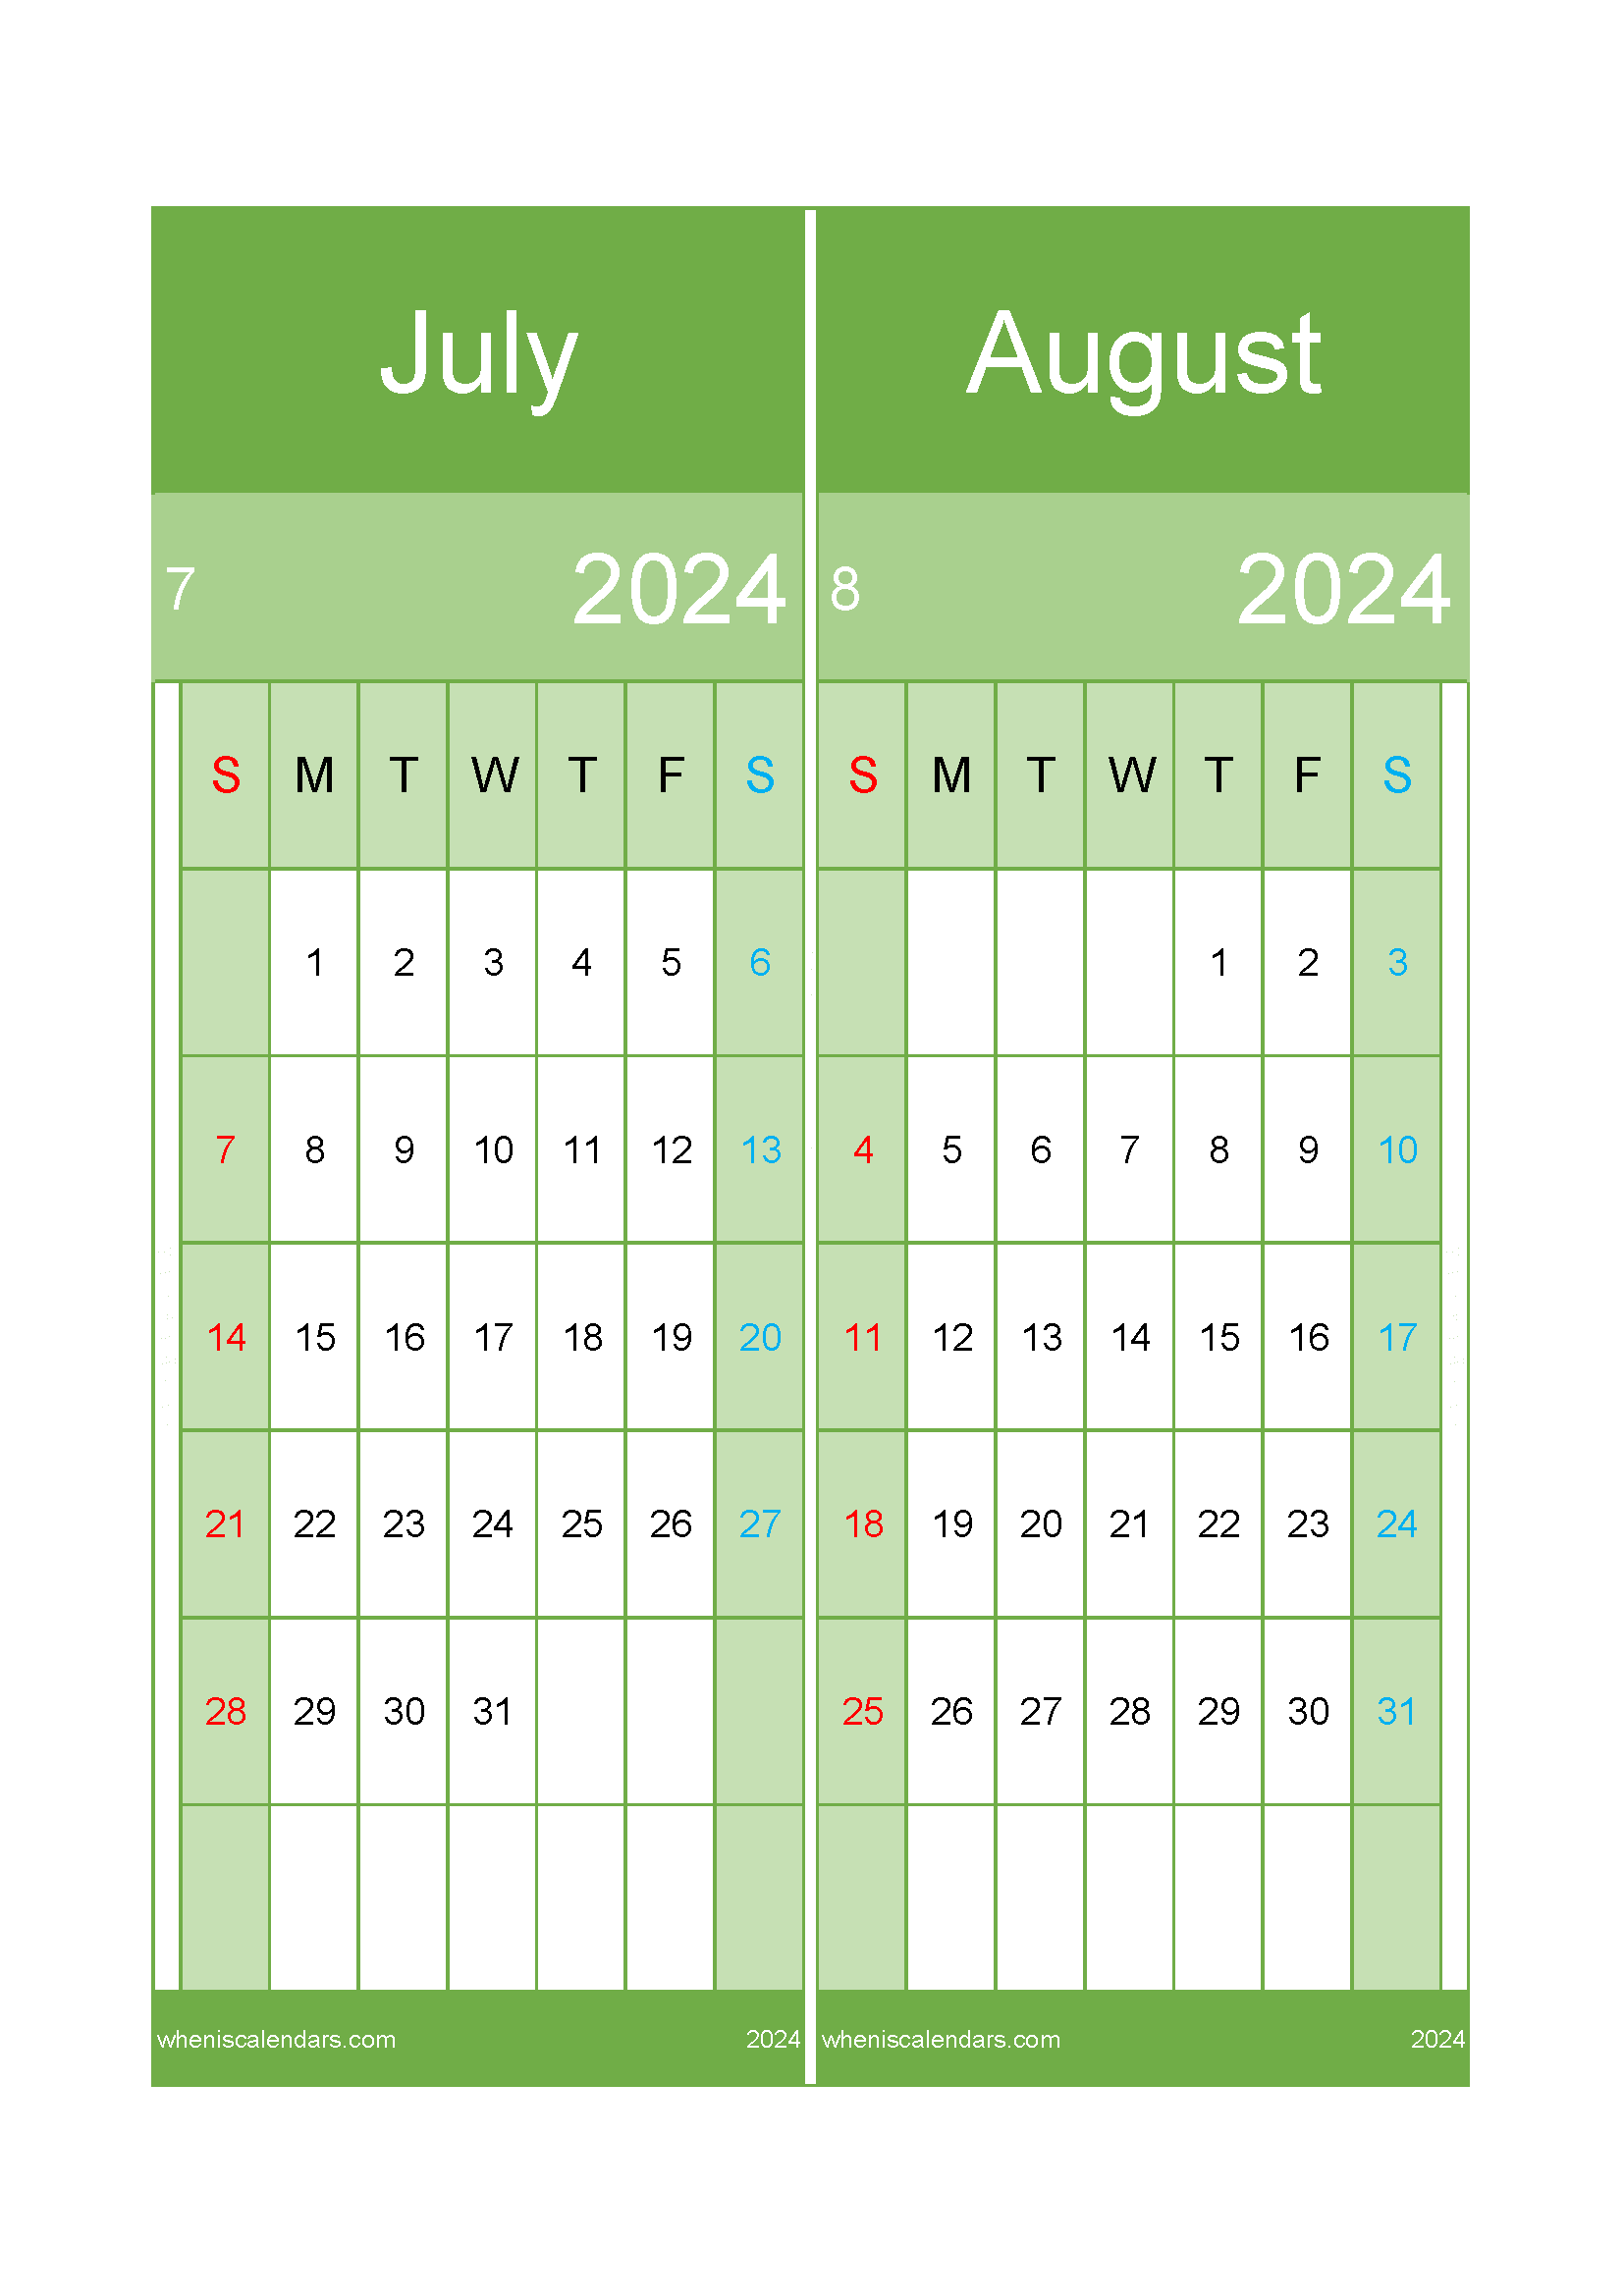 Download August and July calendar 2024 A4 JA24027